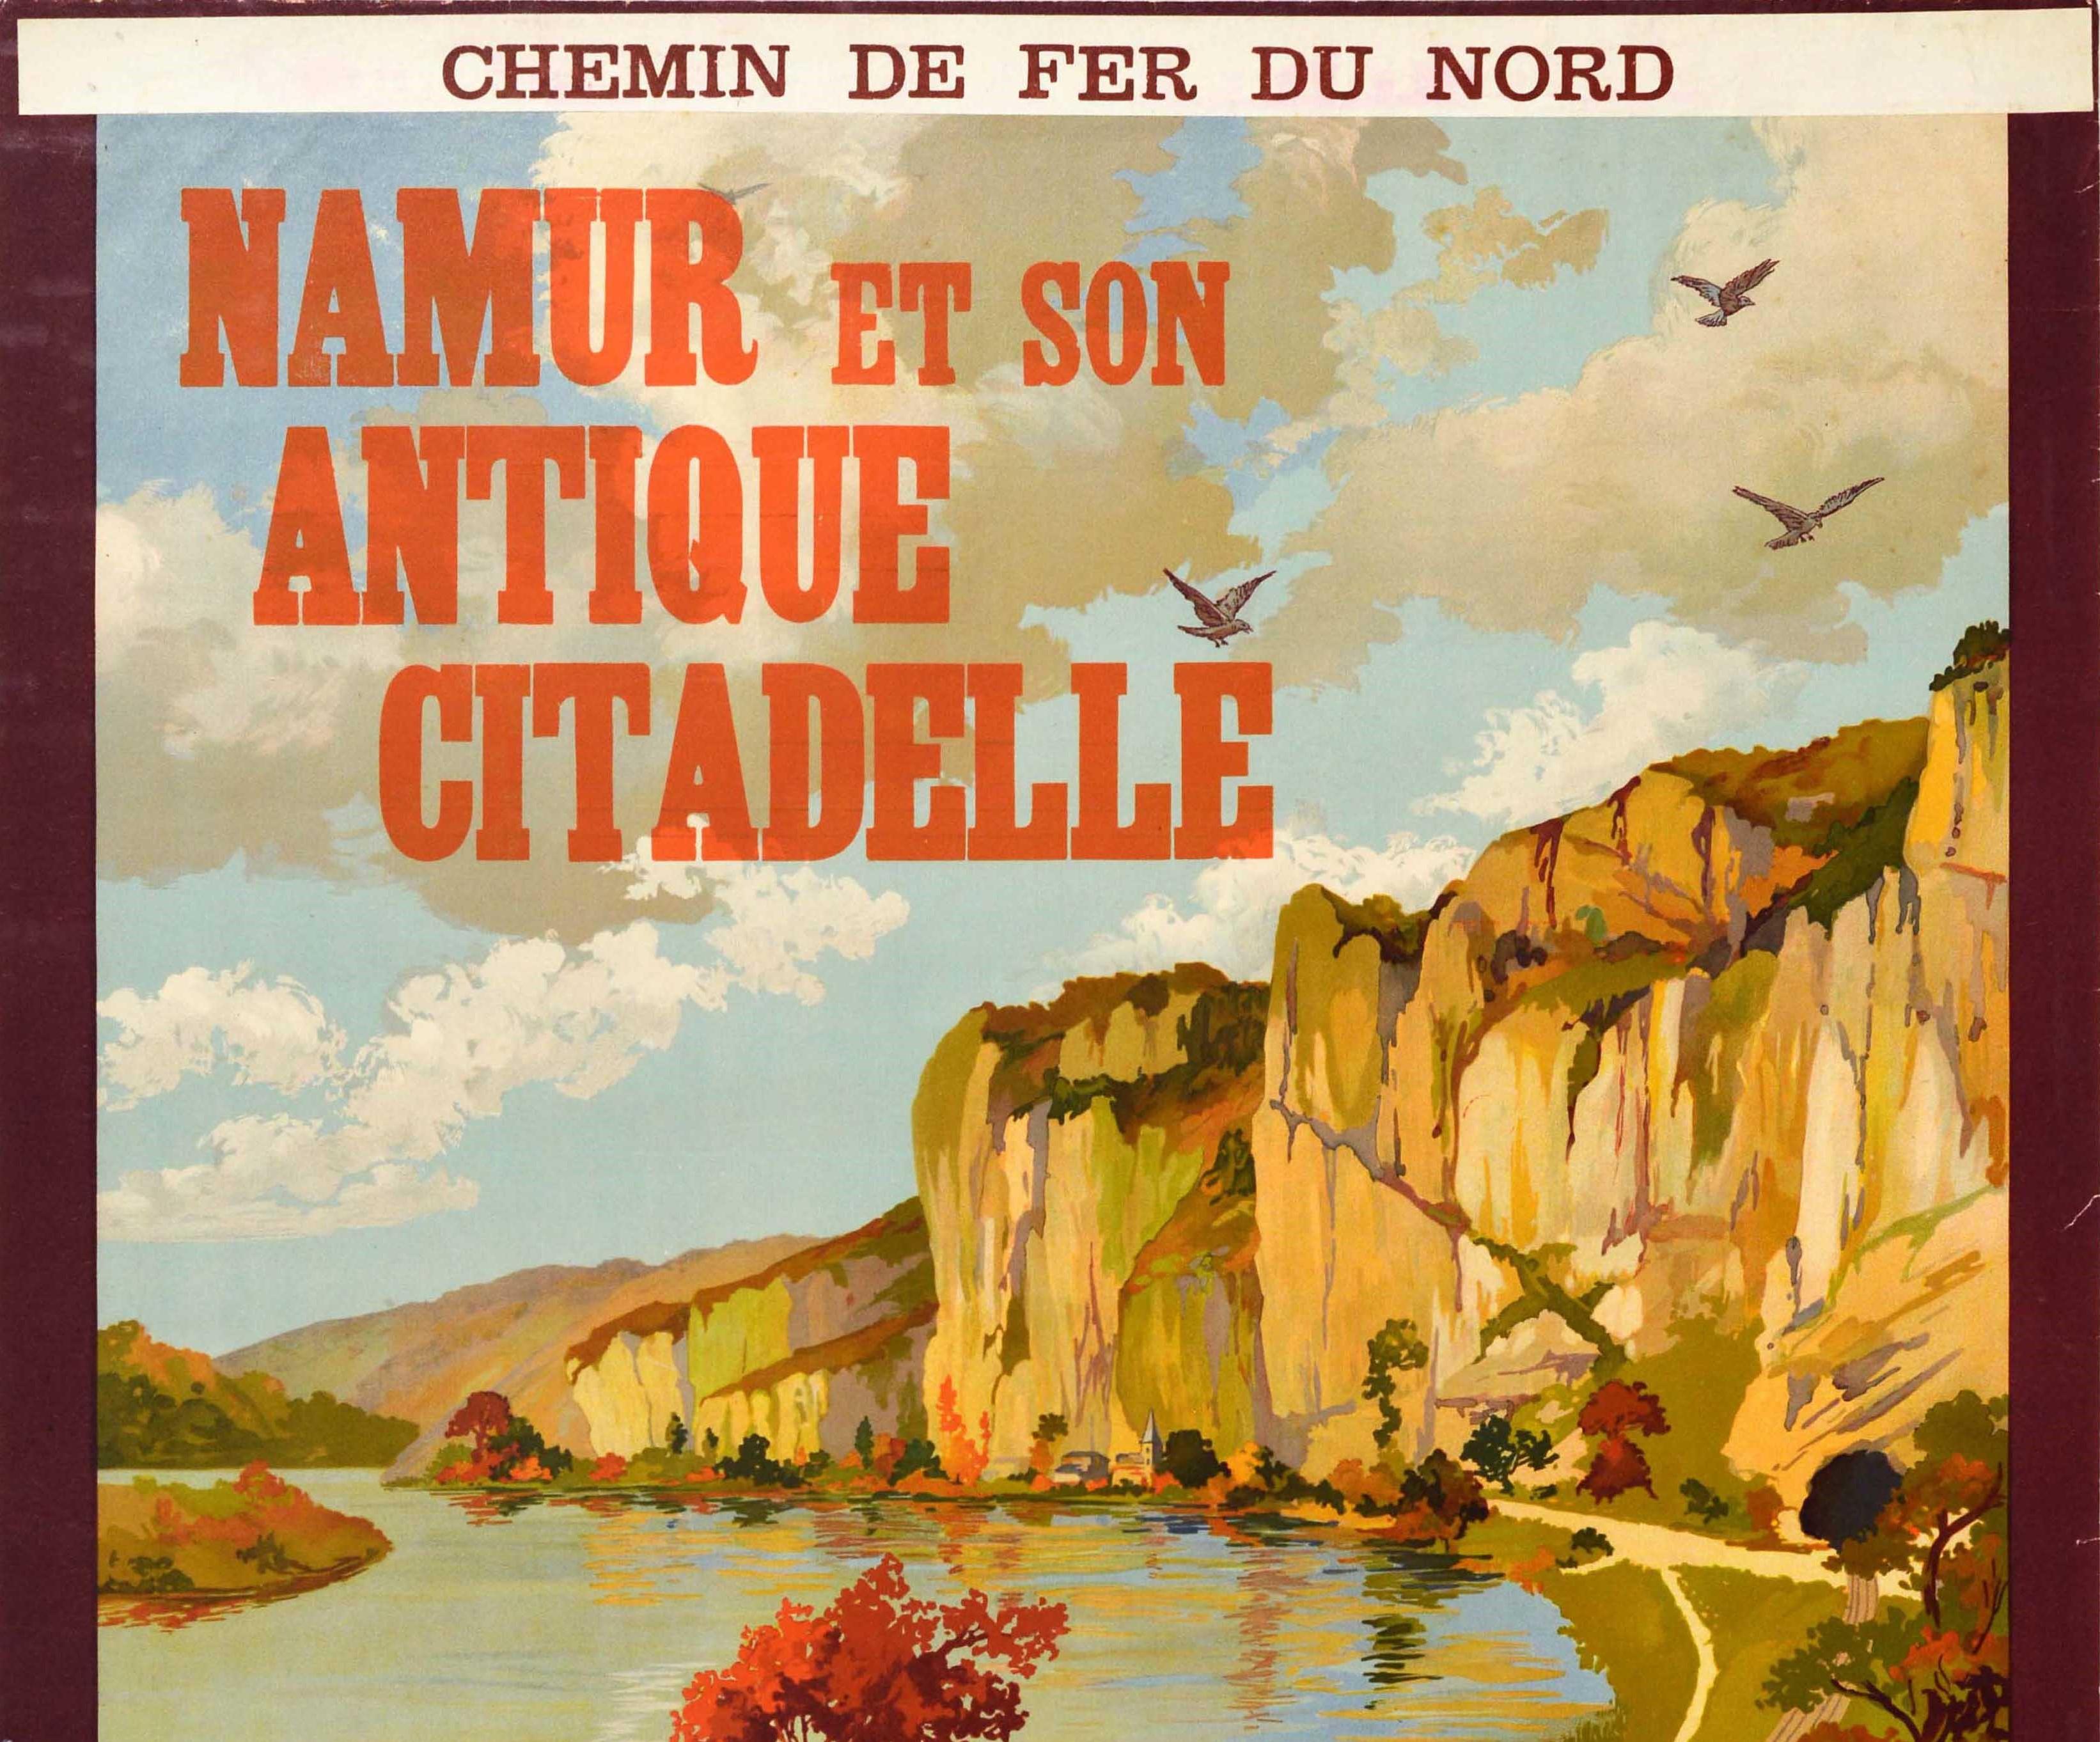 Original vintage travel advertising poster published by the Chemin de Fer du Nord French Northern Railway Company promoting the Belgian city of Namur and its ancient castle (the Citadel of Namur), the Meuse valley river and the Caves of